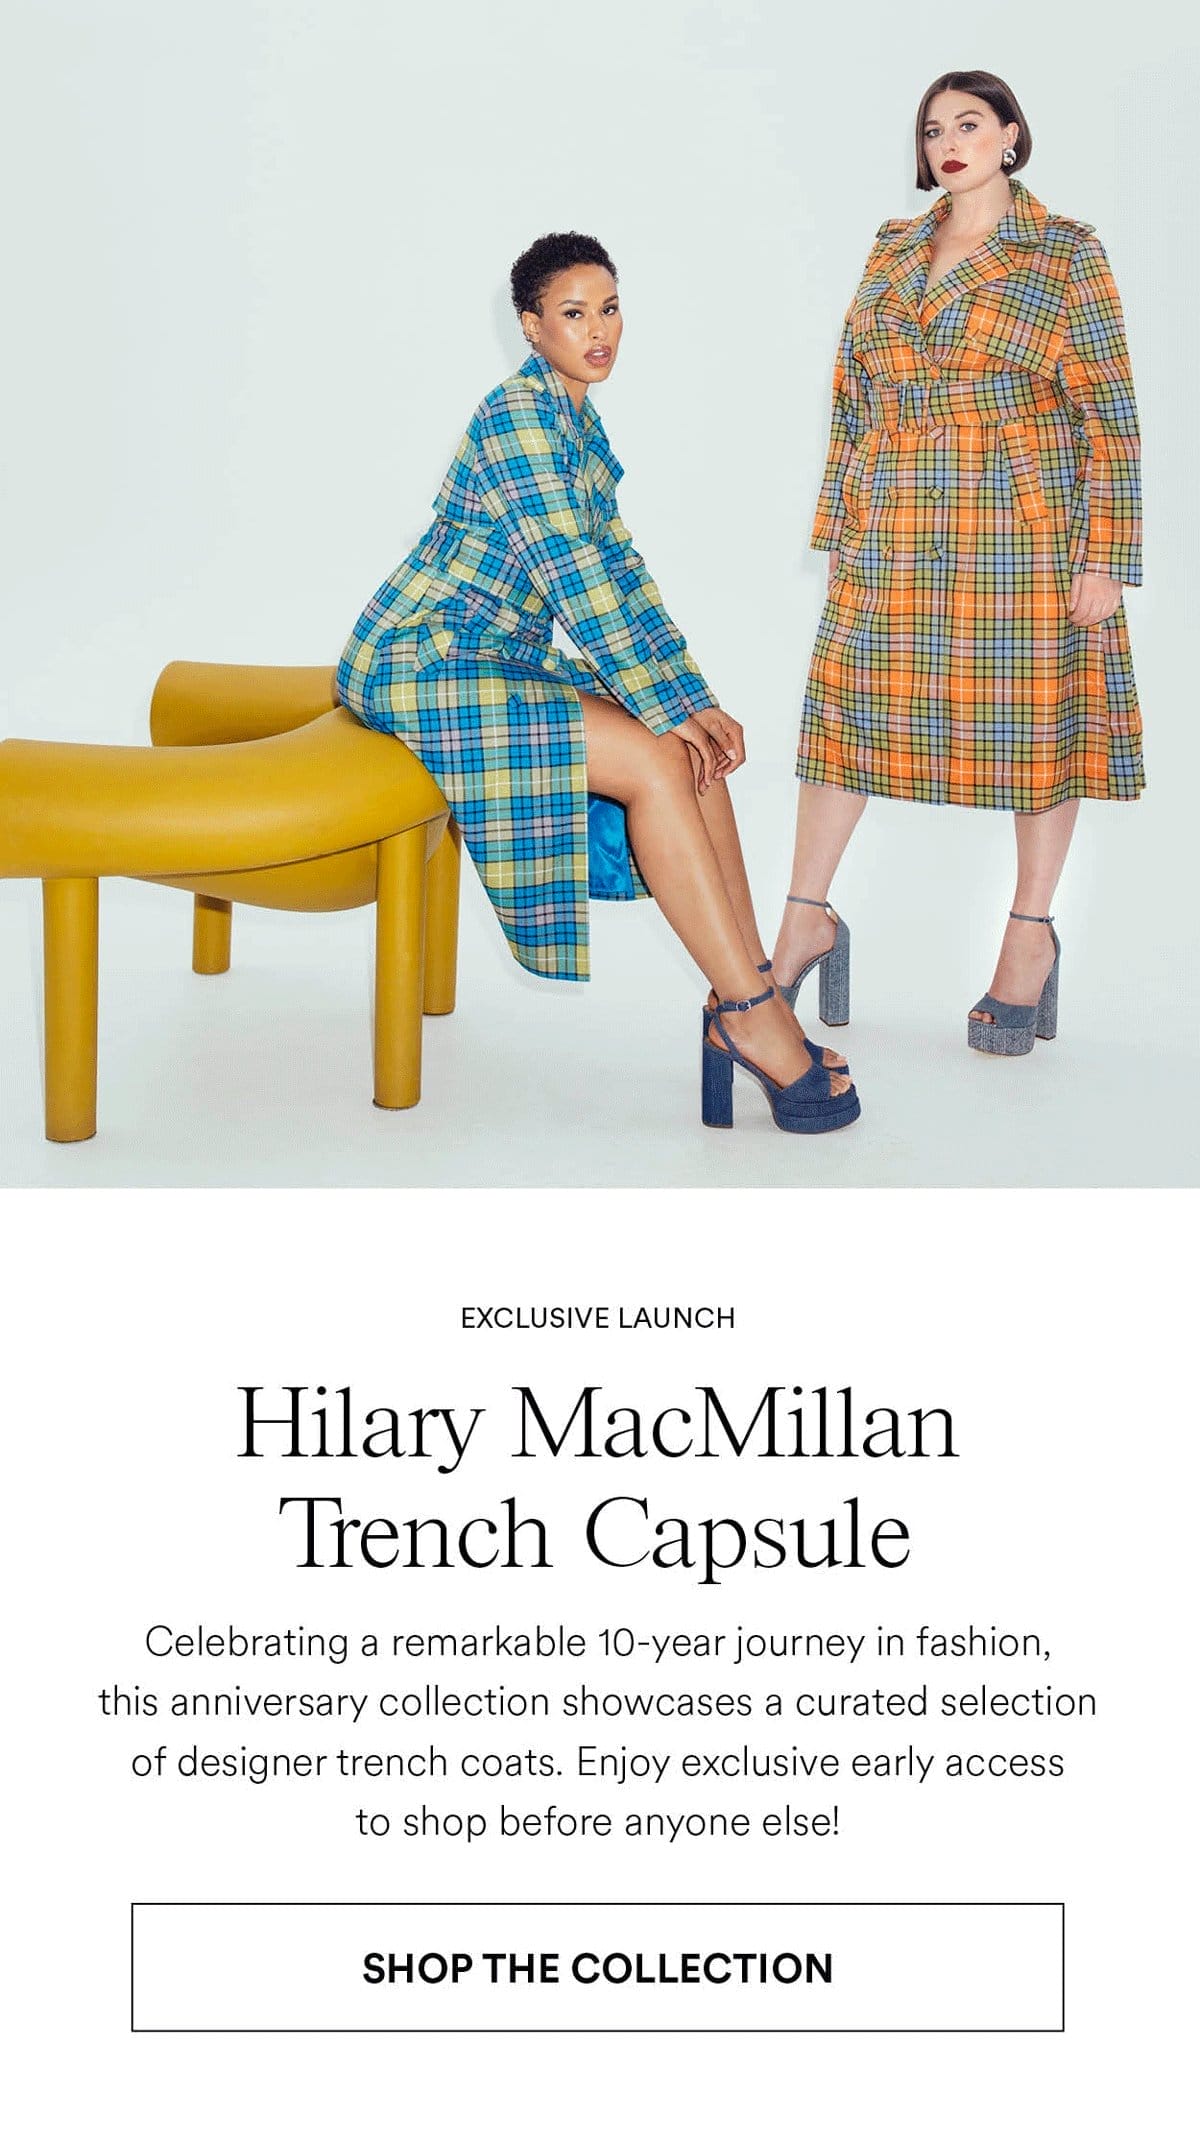 Hilary Macmillan Trench Capsule. Celebrating a remarkable 10-year journey in fashion, this anniversary collection showcases a curated selection of designer trench coats. Enjoy exclusive early access to shop before anyone else! Shop the collection.